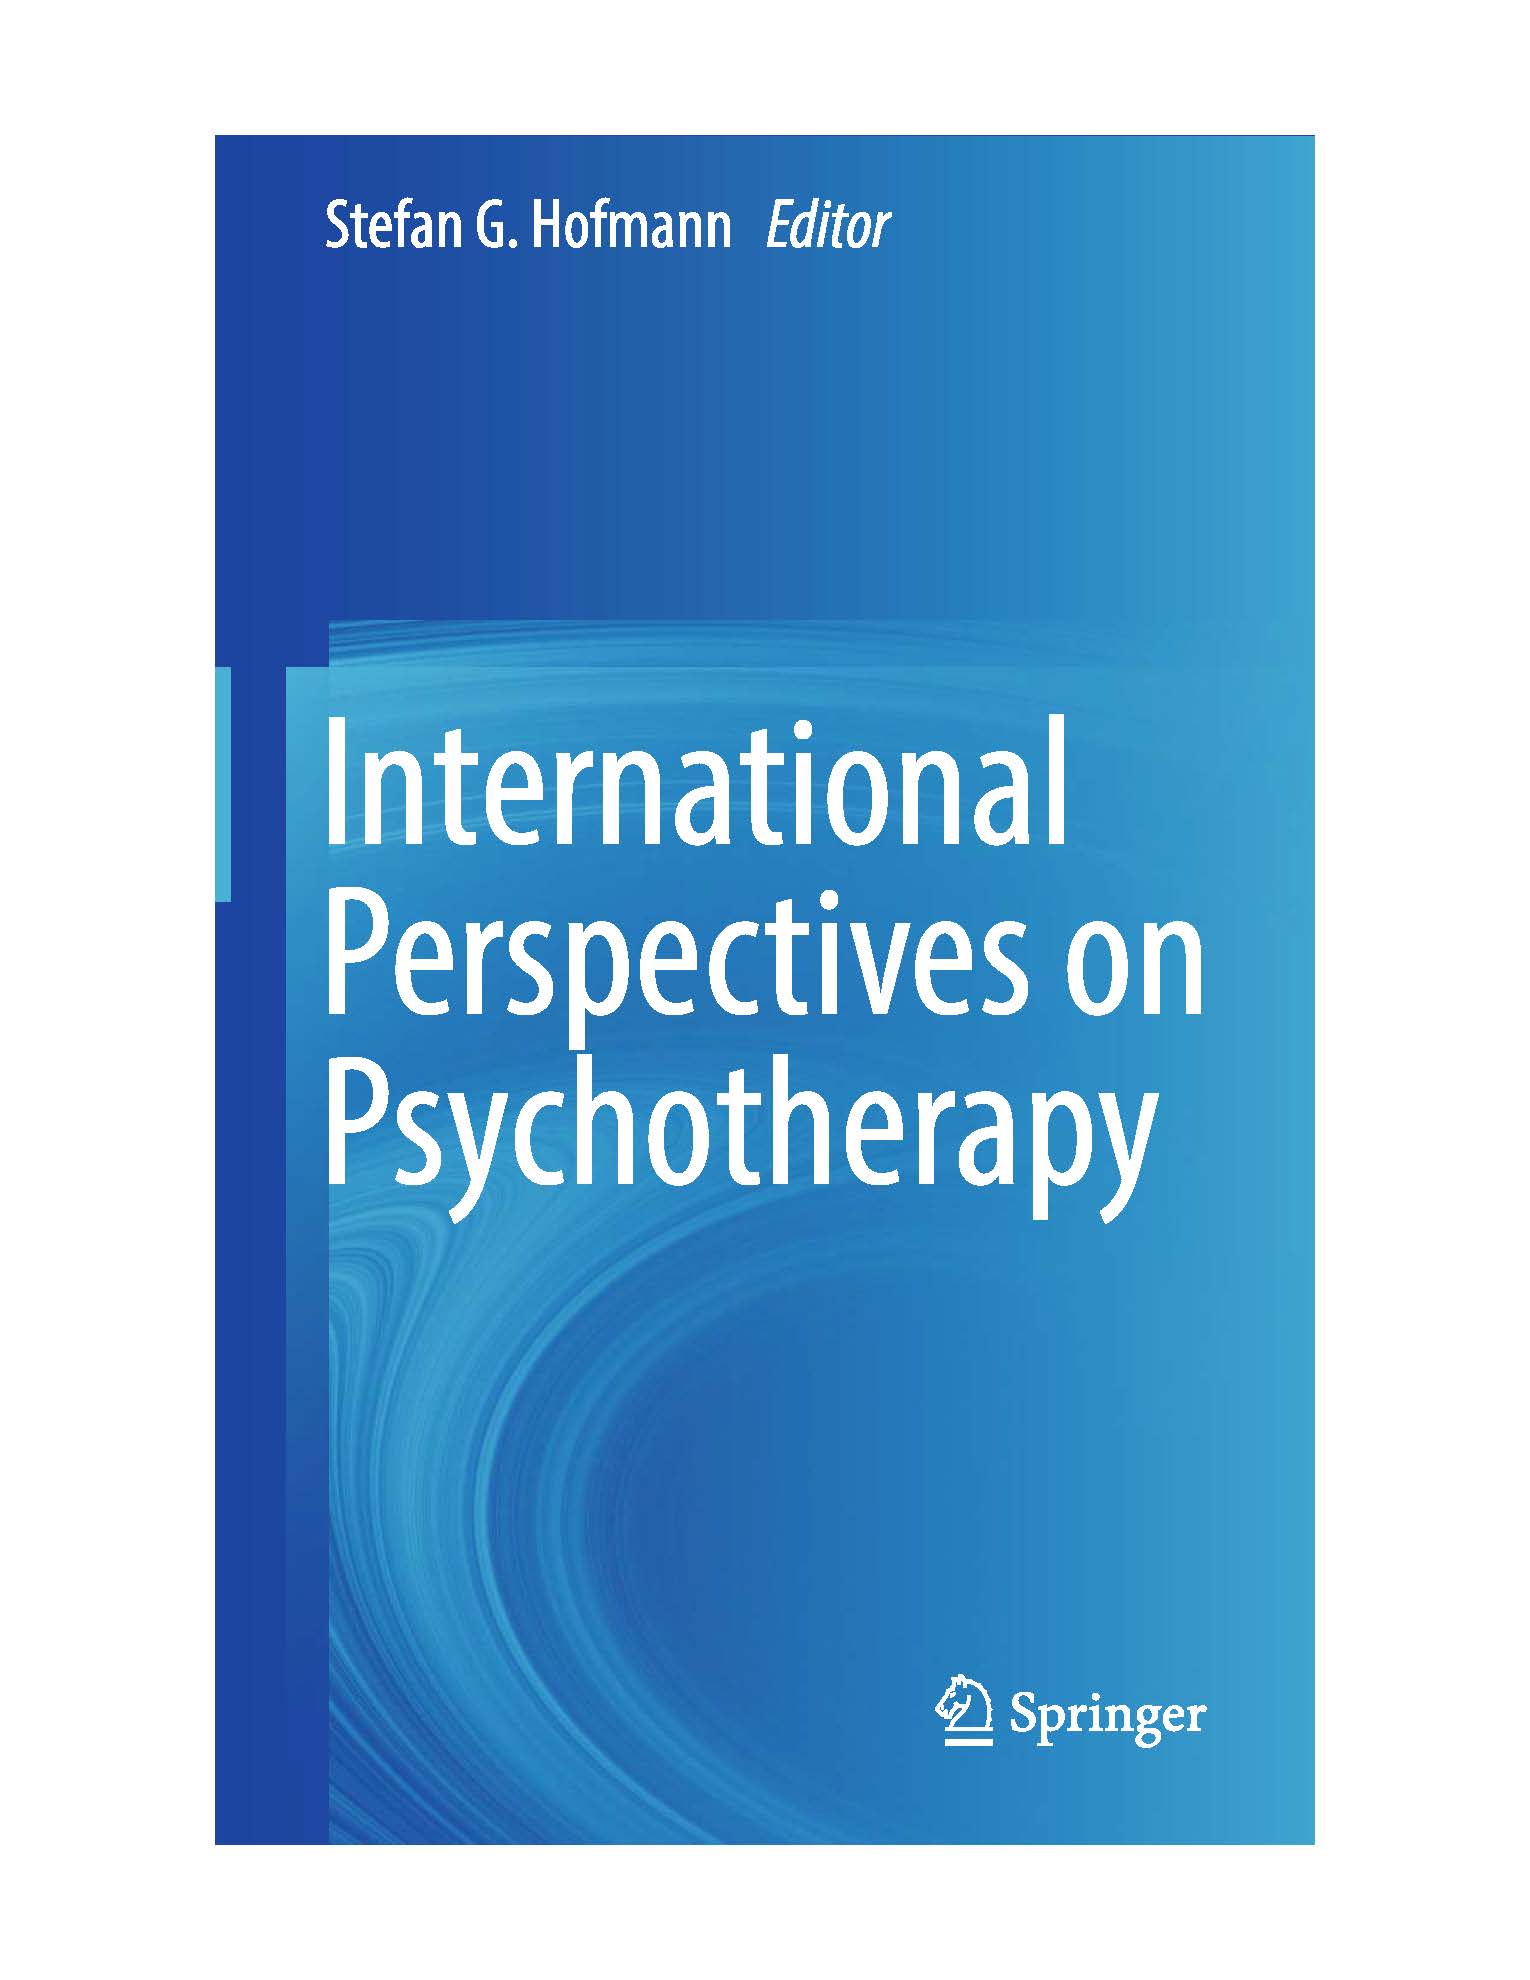 International Perspectives Psychotherapy